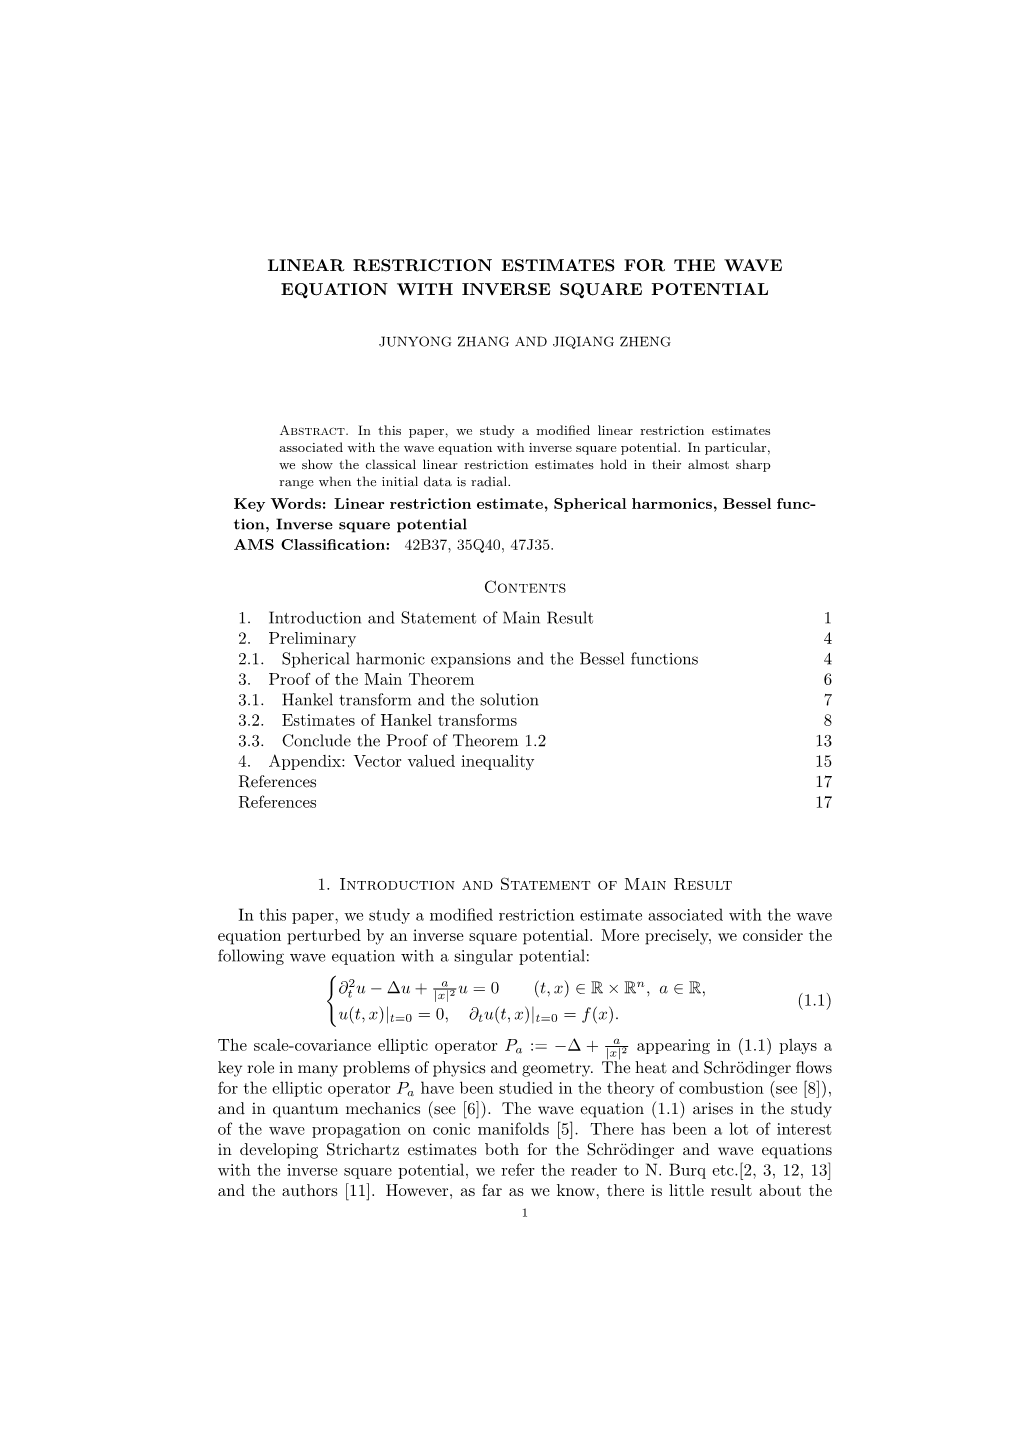 Linear Restriction Estimates for the Wave Equation with Inverse Square Potential